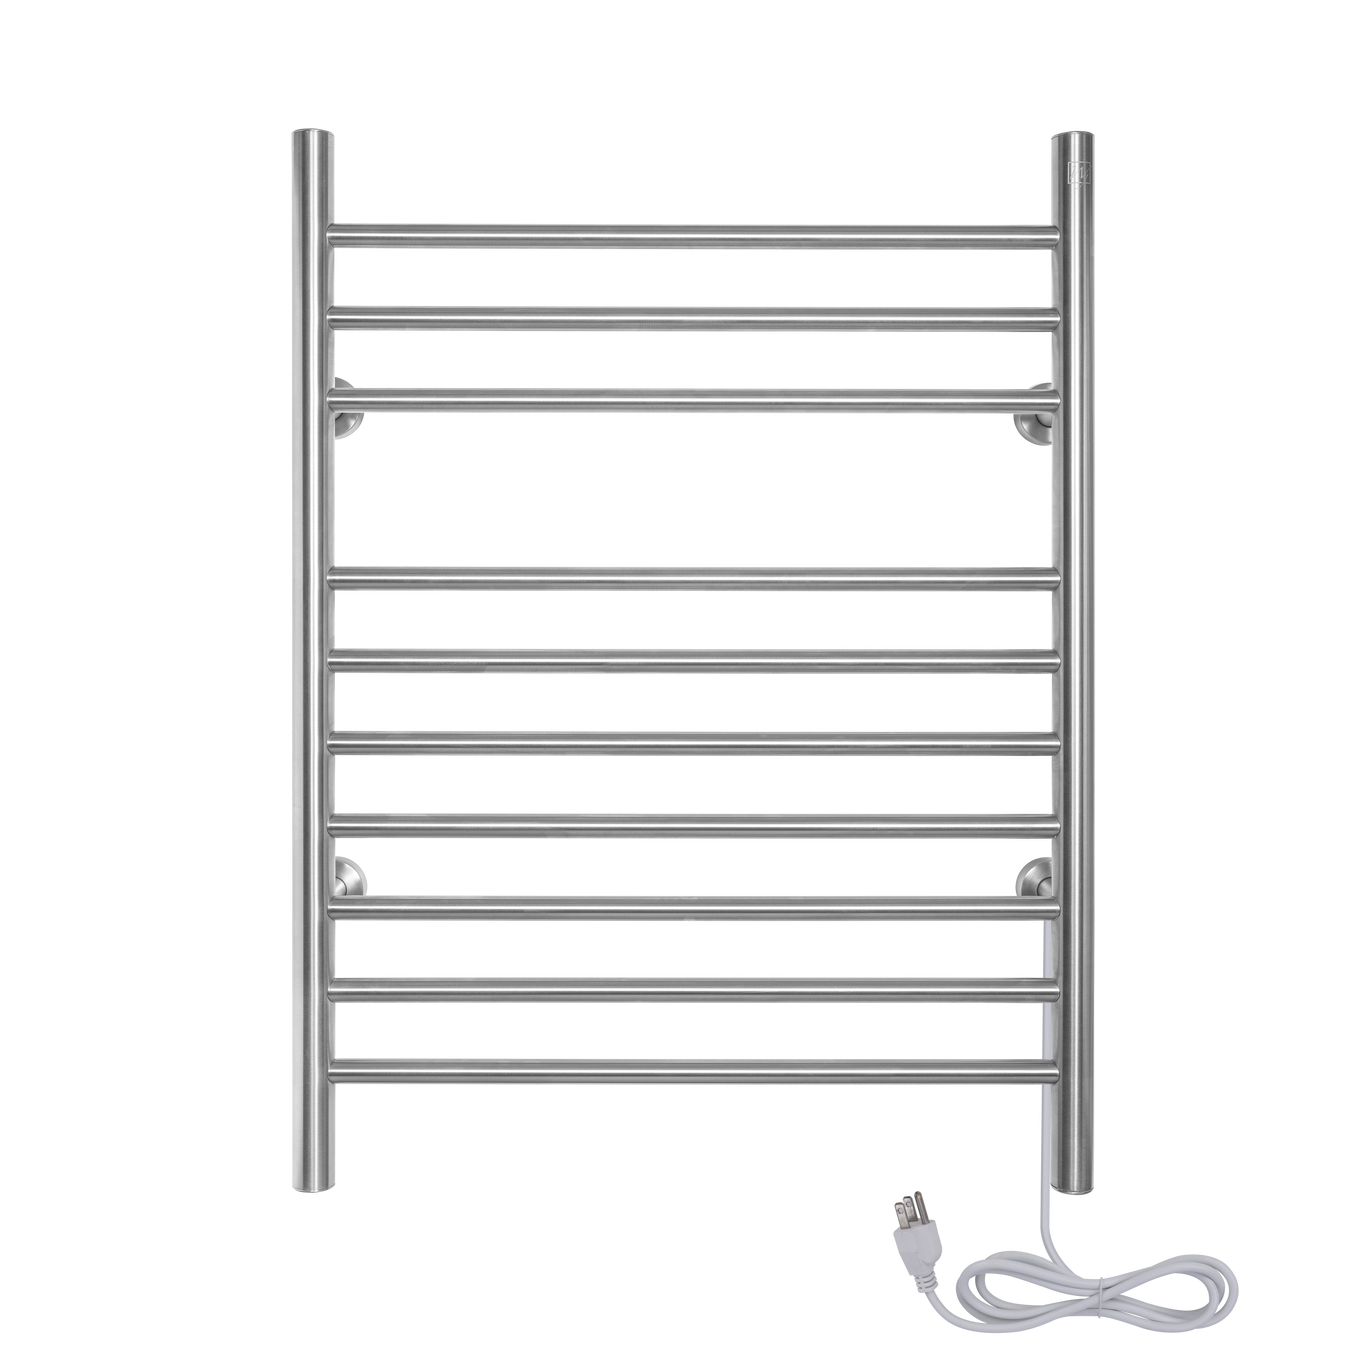 WarmlyYours, WarmlyYours TW-F10PS-HP Infinity Dual Connection 10 Bar Towel Warmer in Polished Stainless Steel New